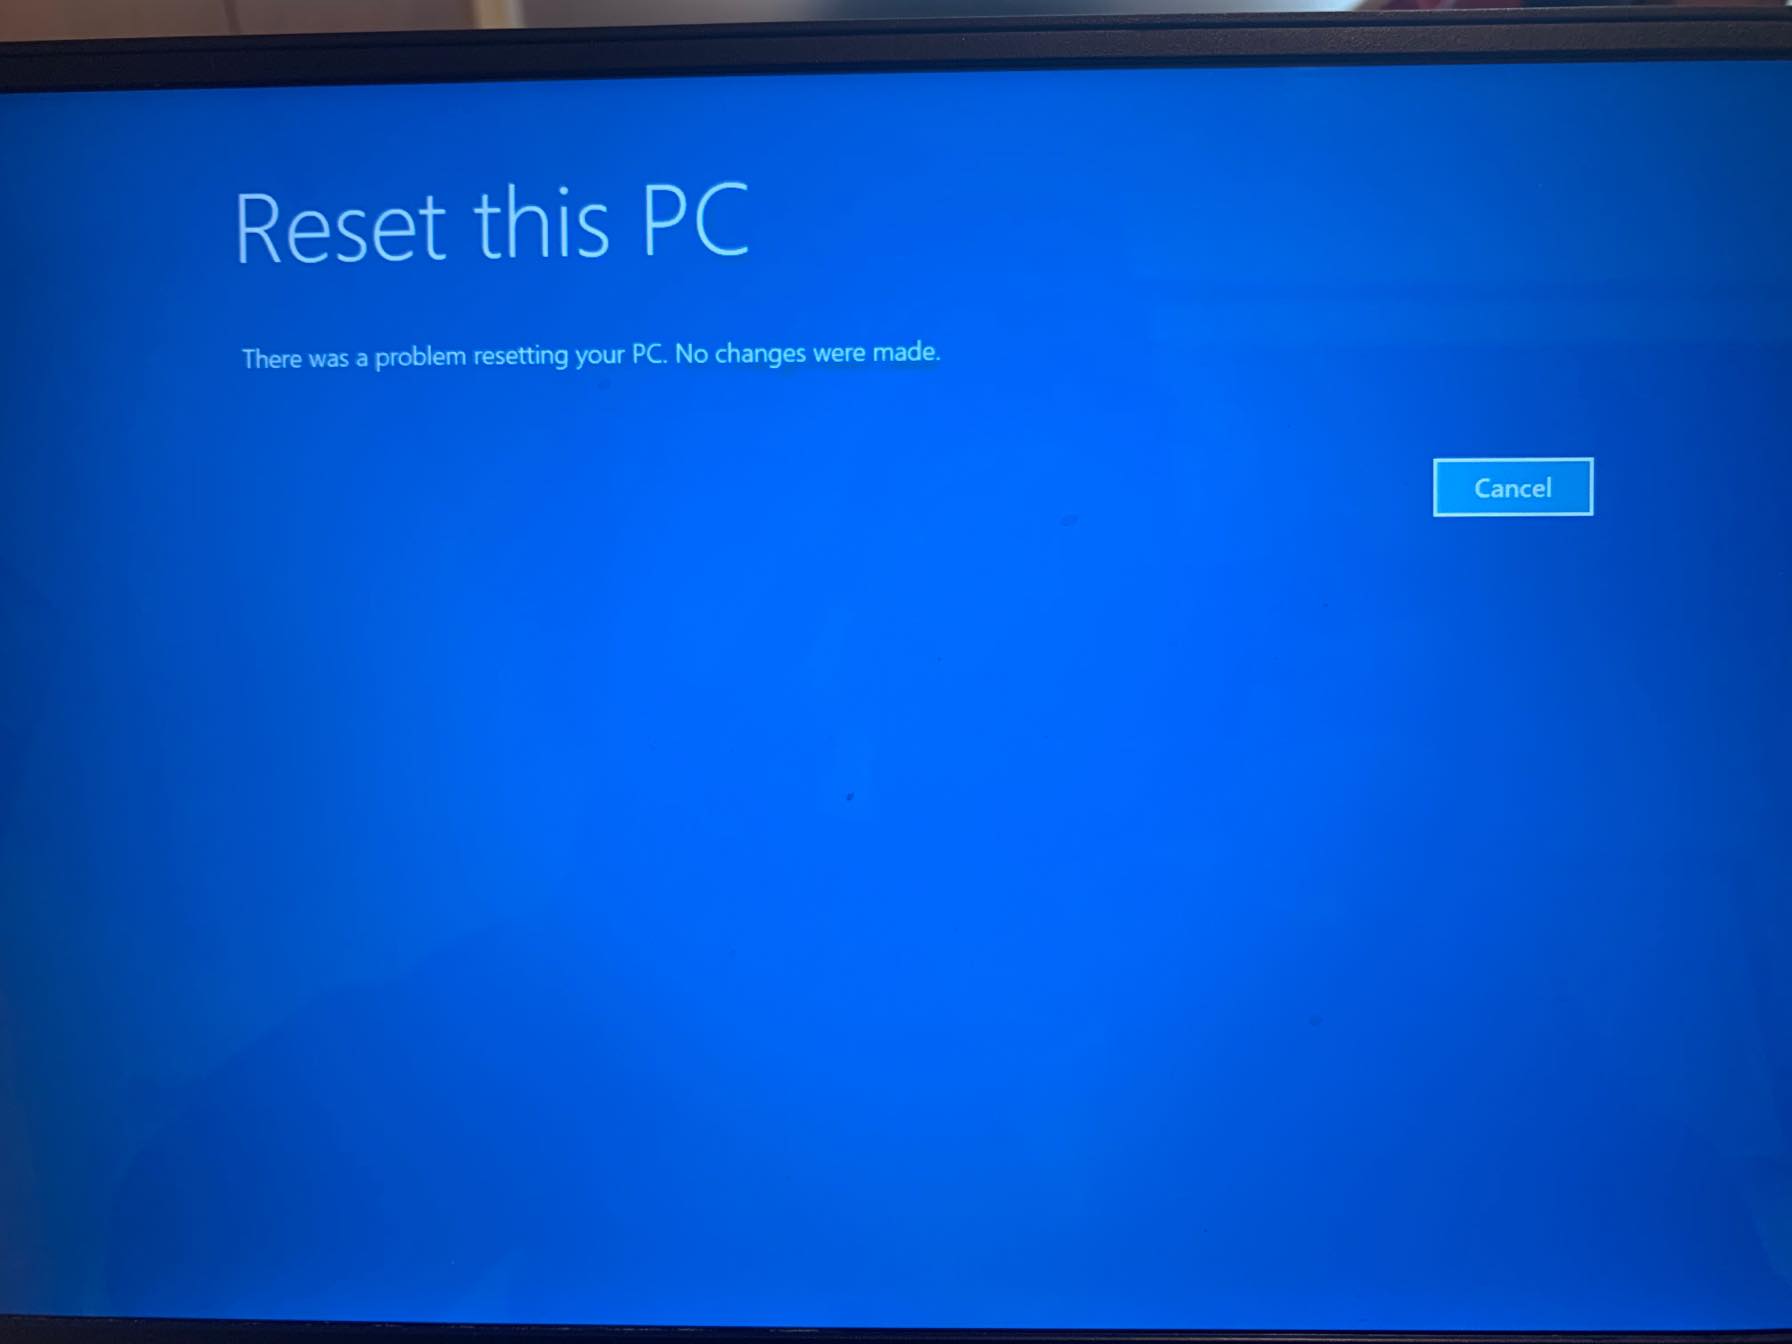 windows 10 issues with dell laptops